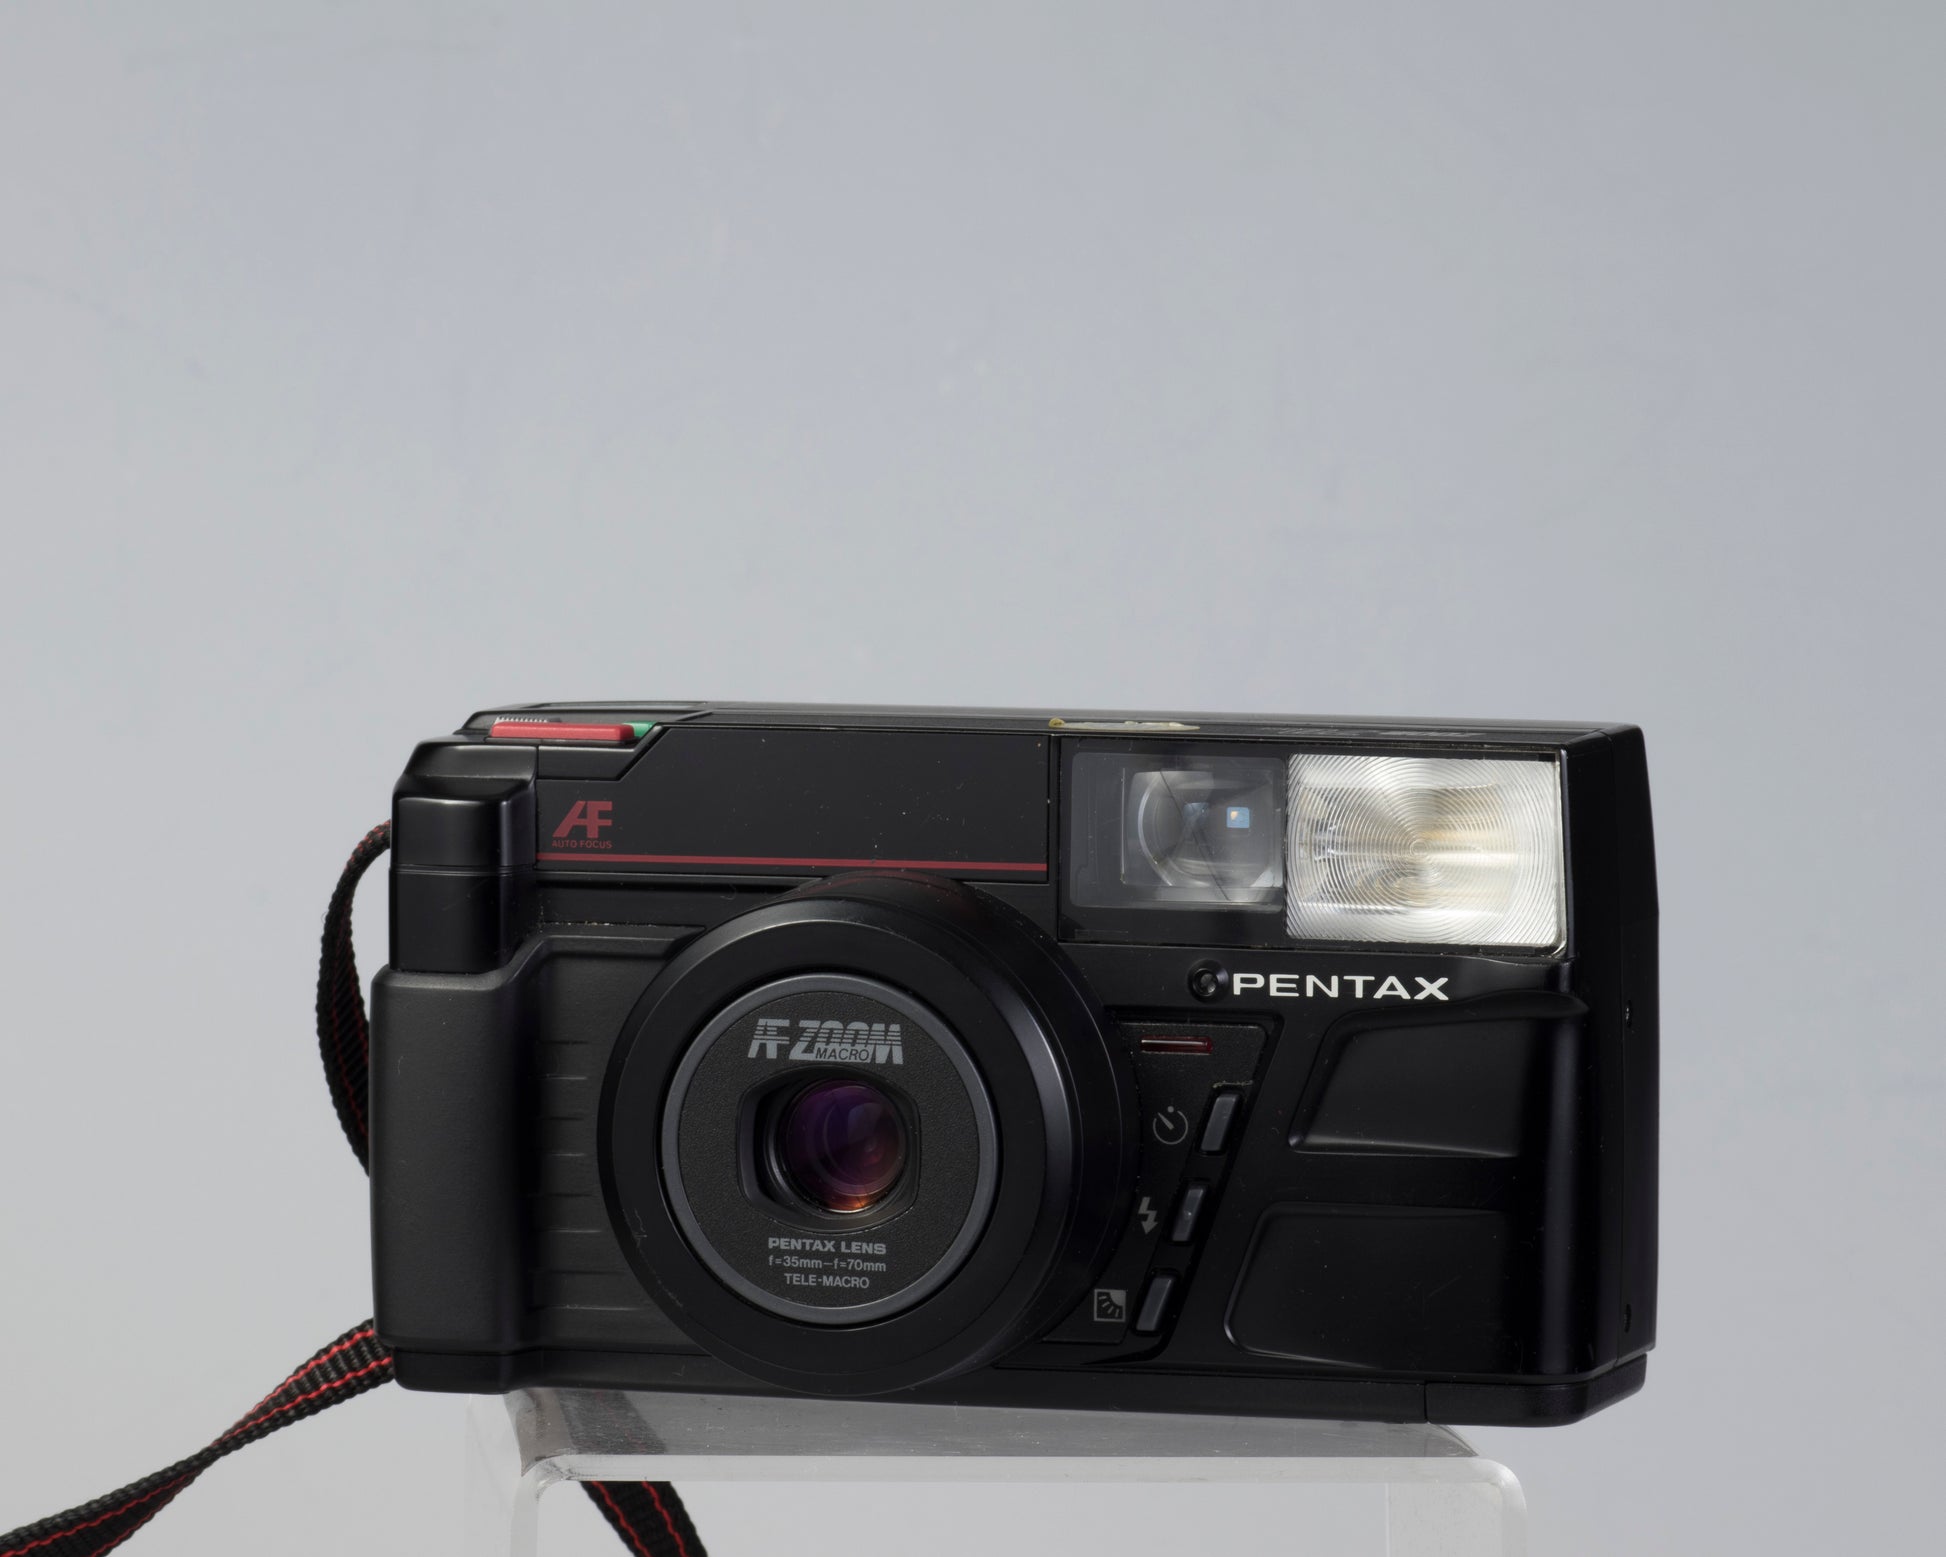 The Pentax Zoom-70 (aka IQZoom) is a quality zoom point-and-shoot released in 1986. It is the first of the long-running IQZoom/Espio series.